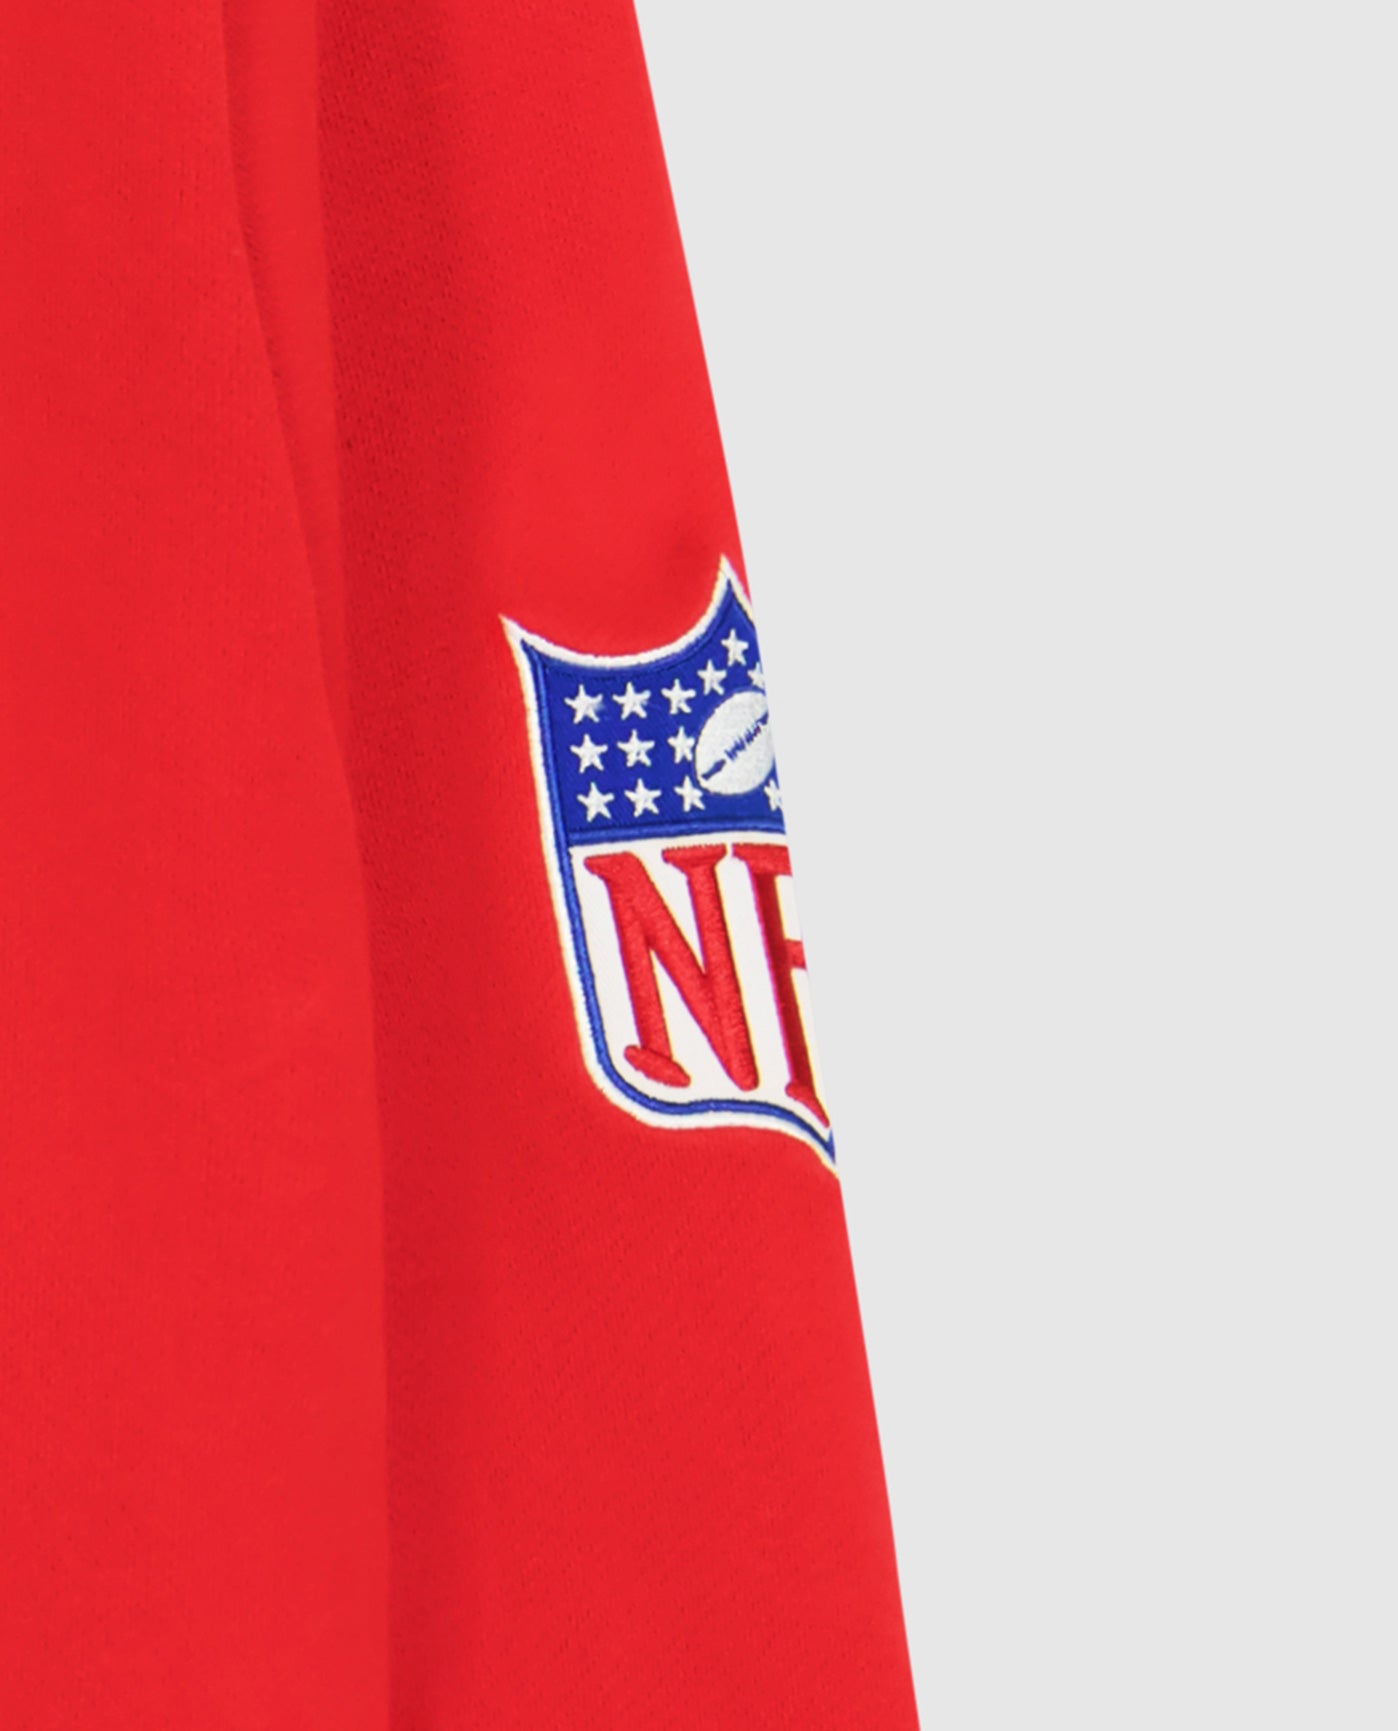 NFL Logo on Sleeve | Falcons Red